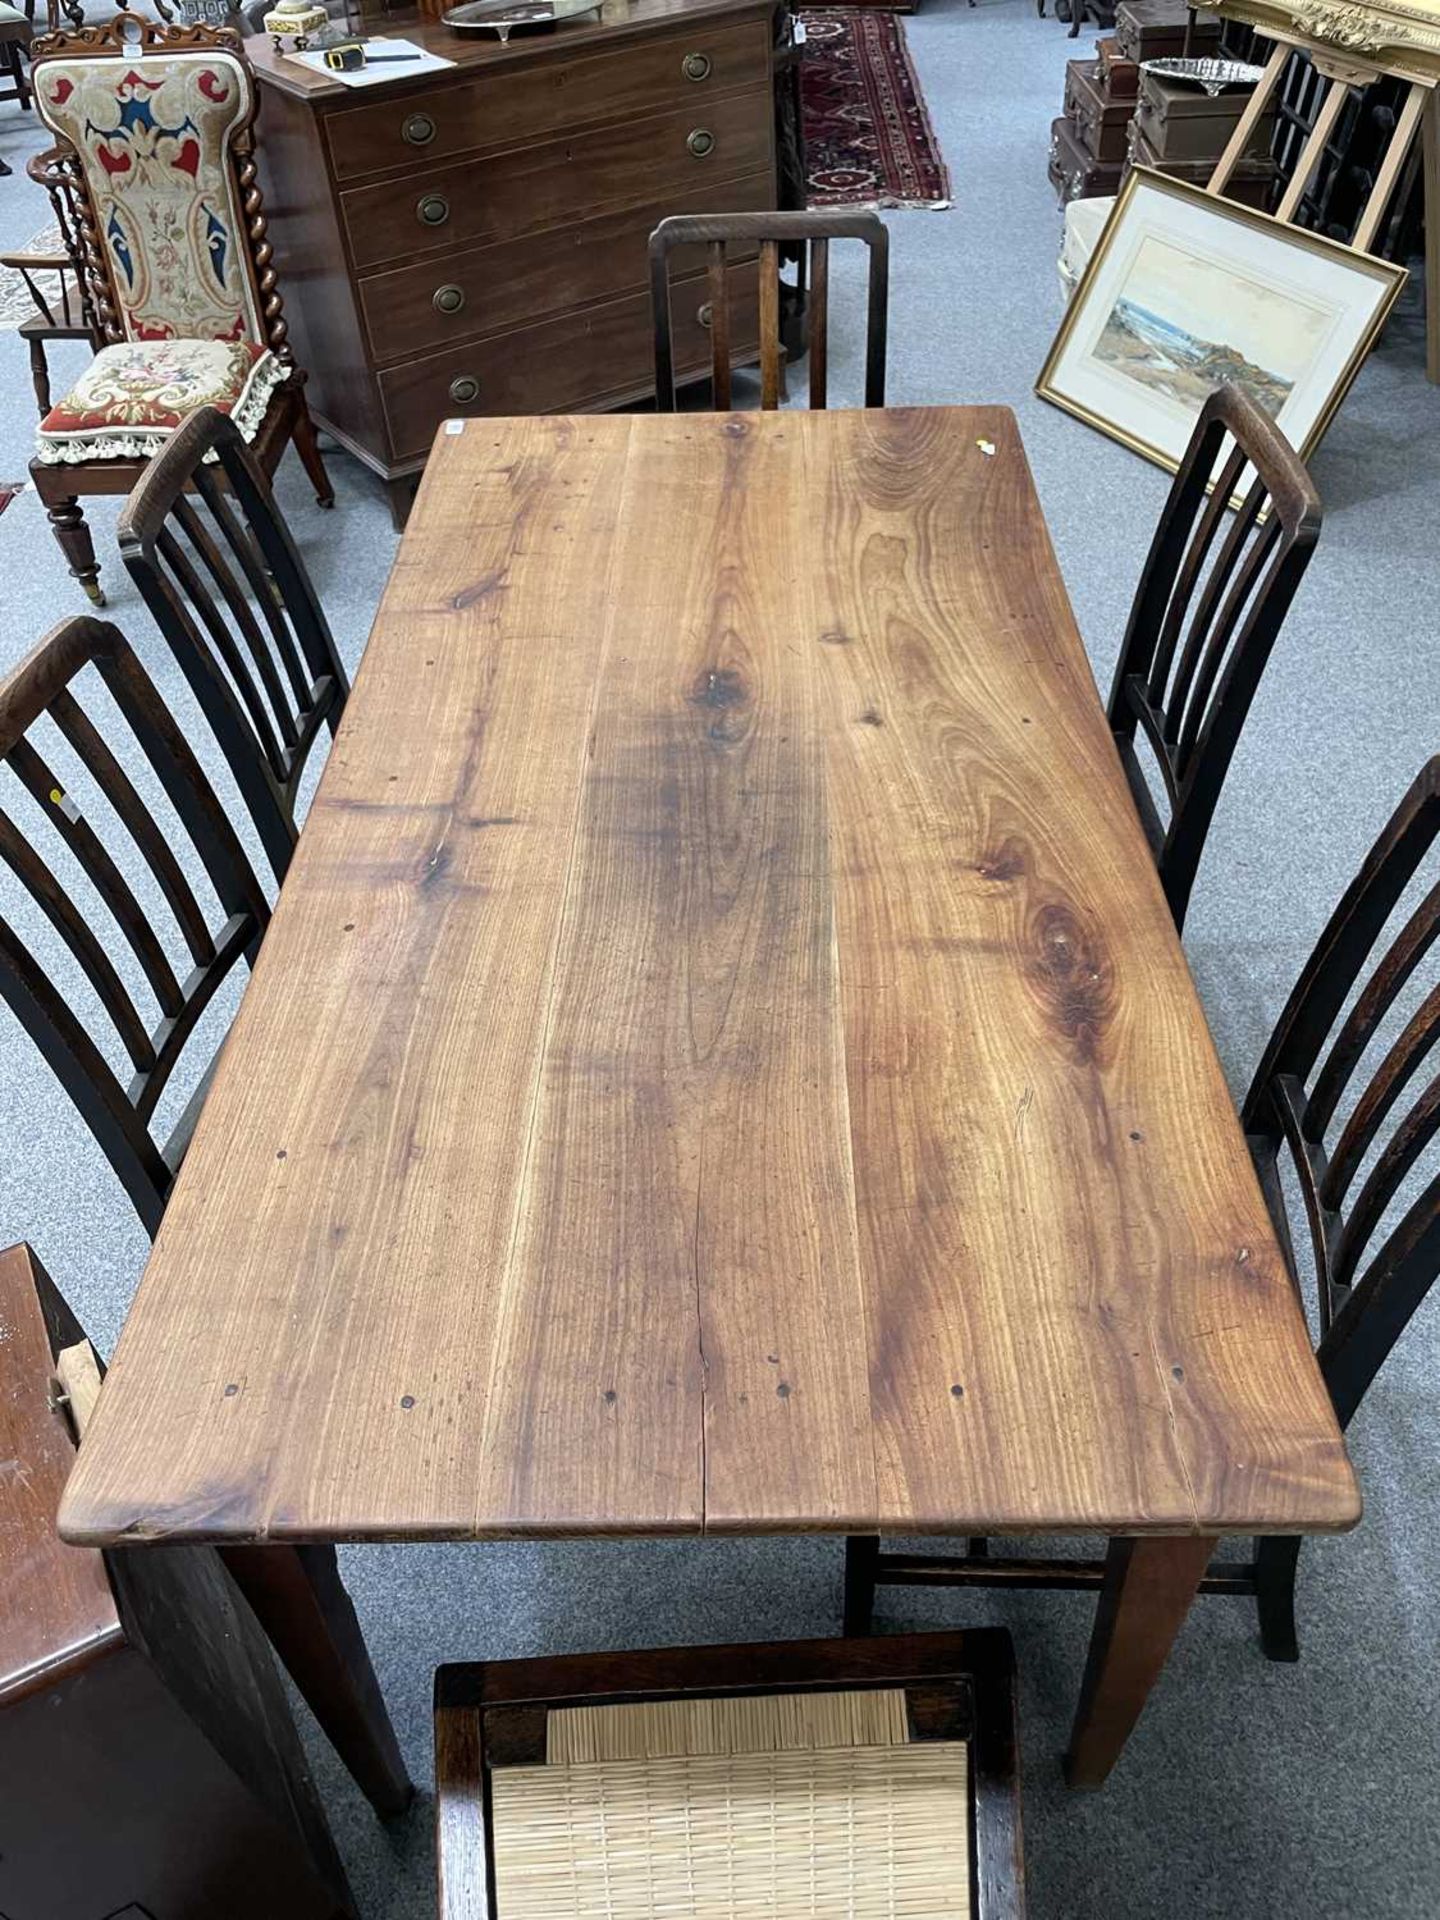 A 19TH CENTURY FRENCH CHERRY WOOD KITCHEN TABLE - Image 2 of 9